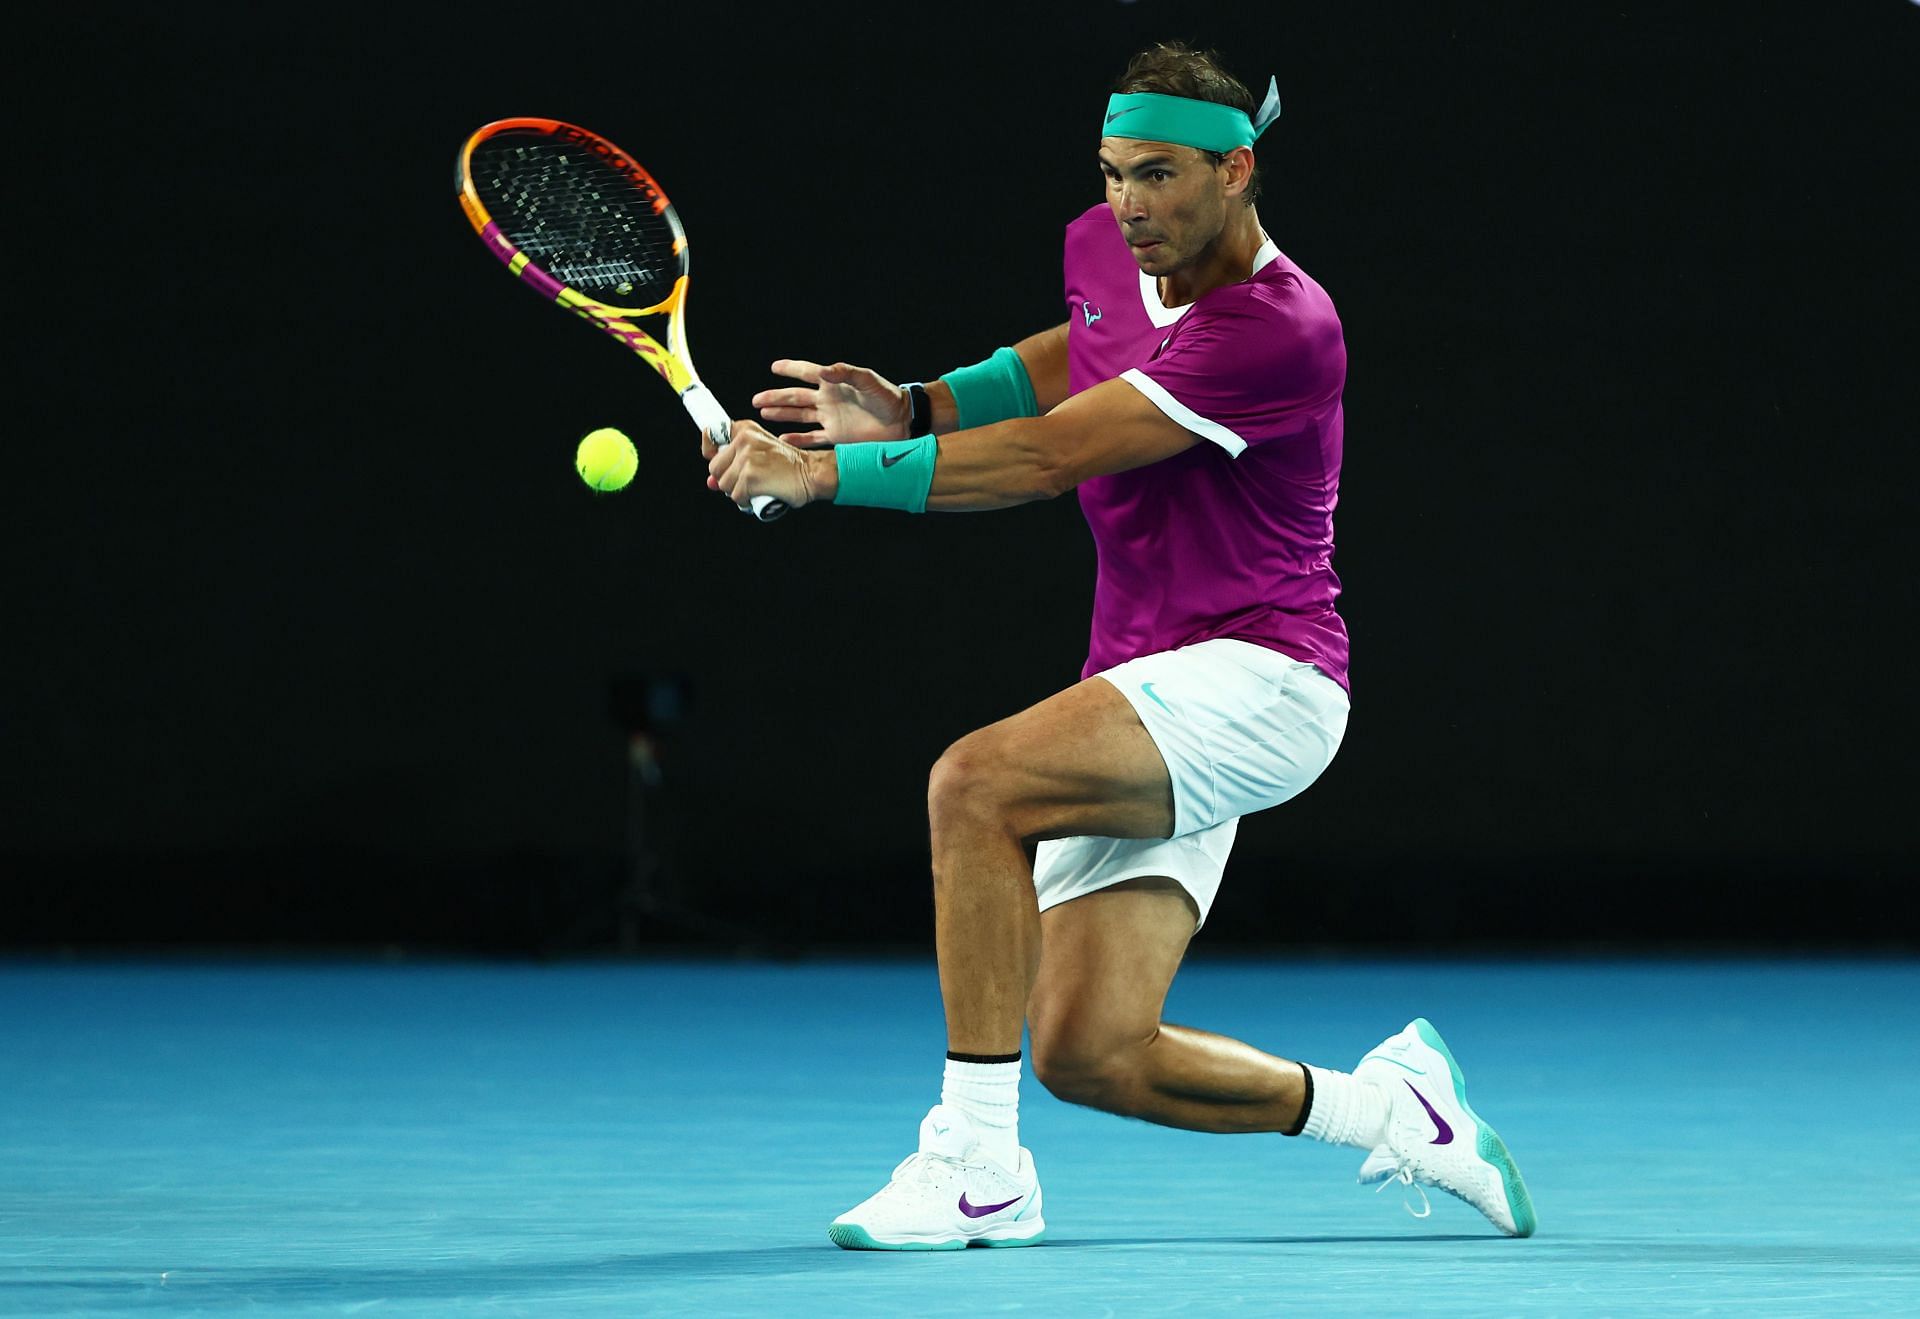 Australian Open 2022 Schedule Today TV schedule, start time, order of play, live stream details and more